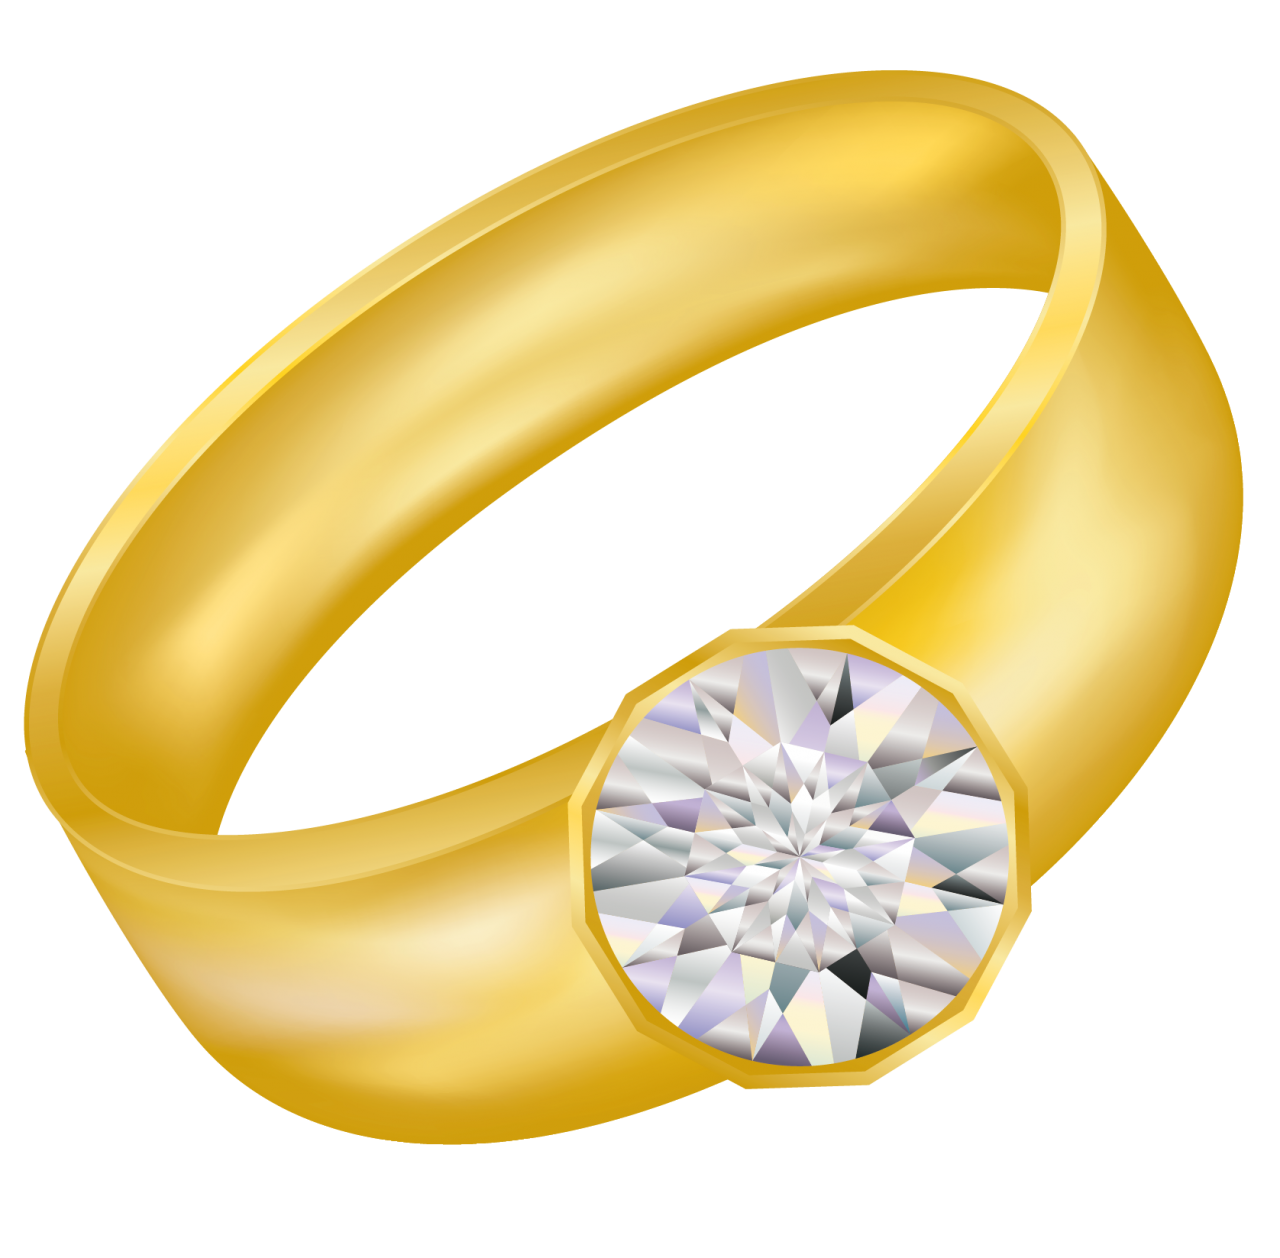 Gold Ring With Diamond Png Image Purepng Free Transparent Cc0 Png